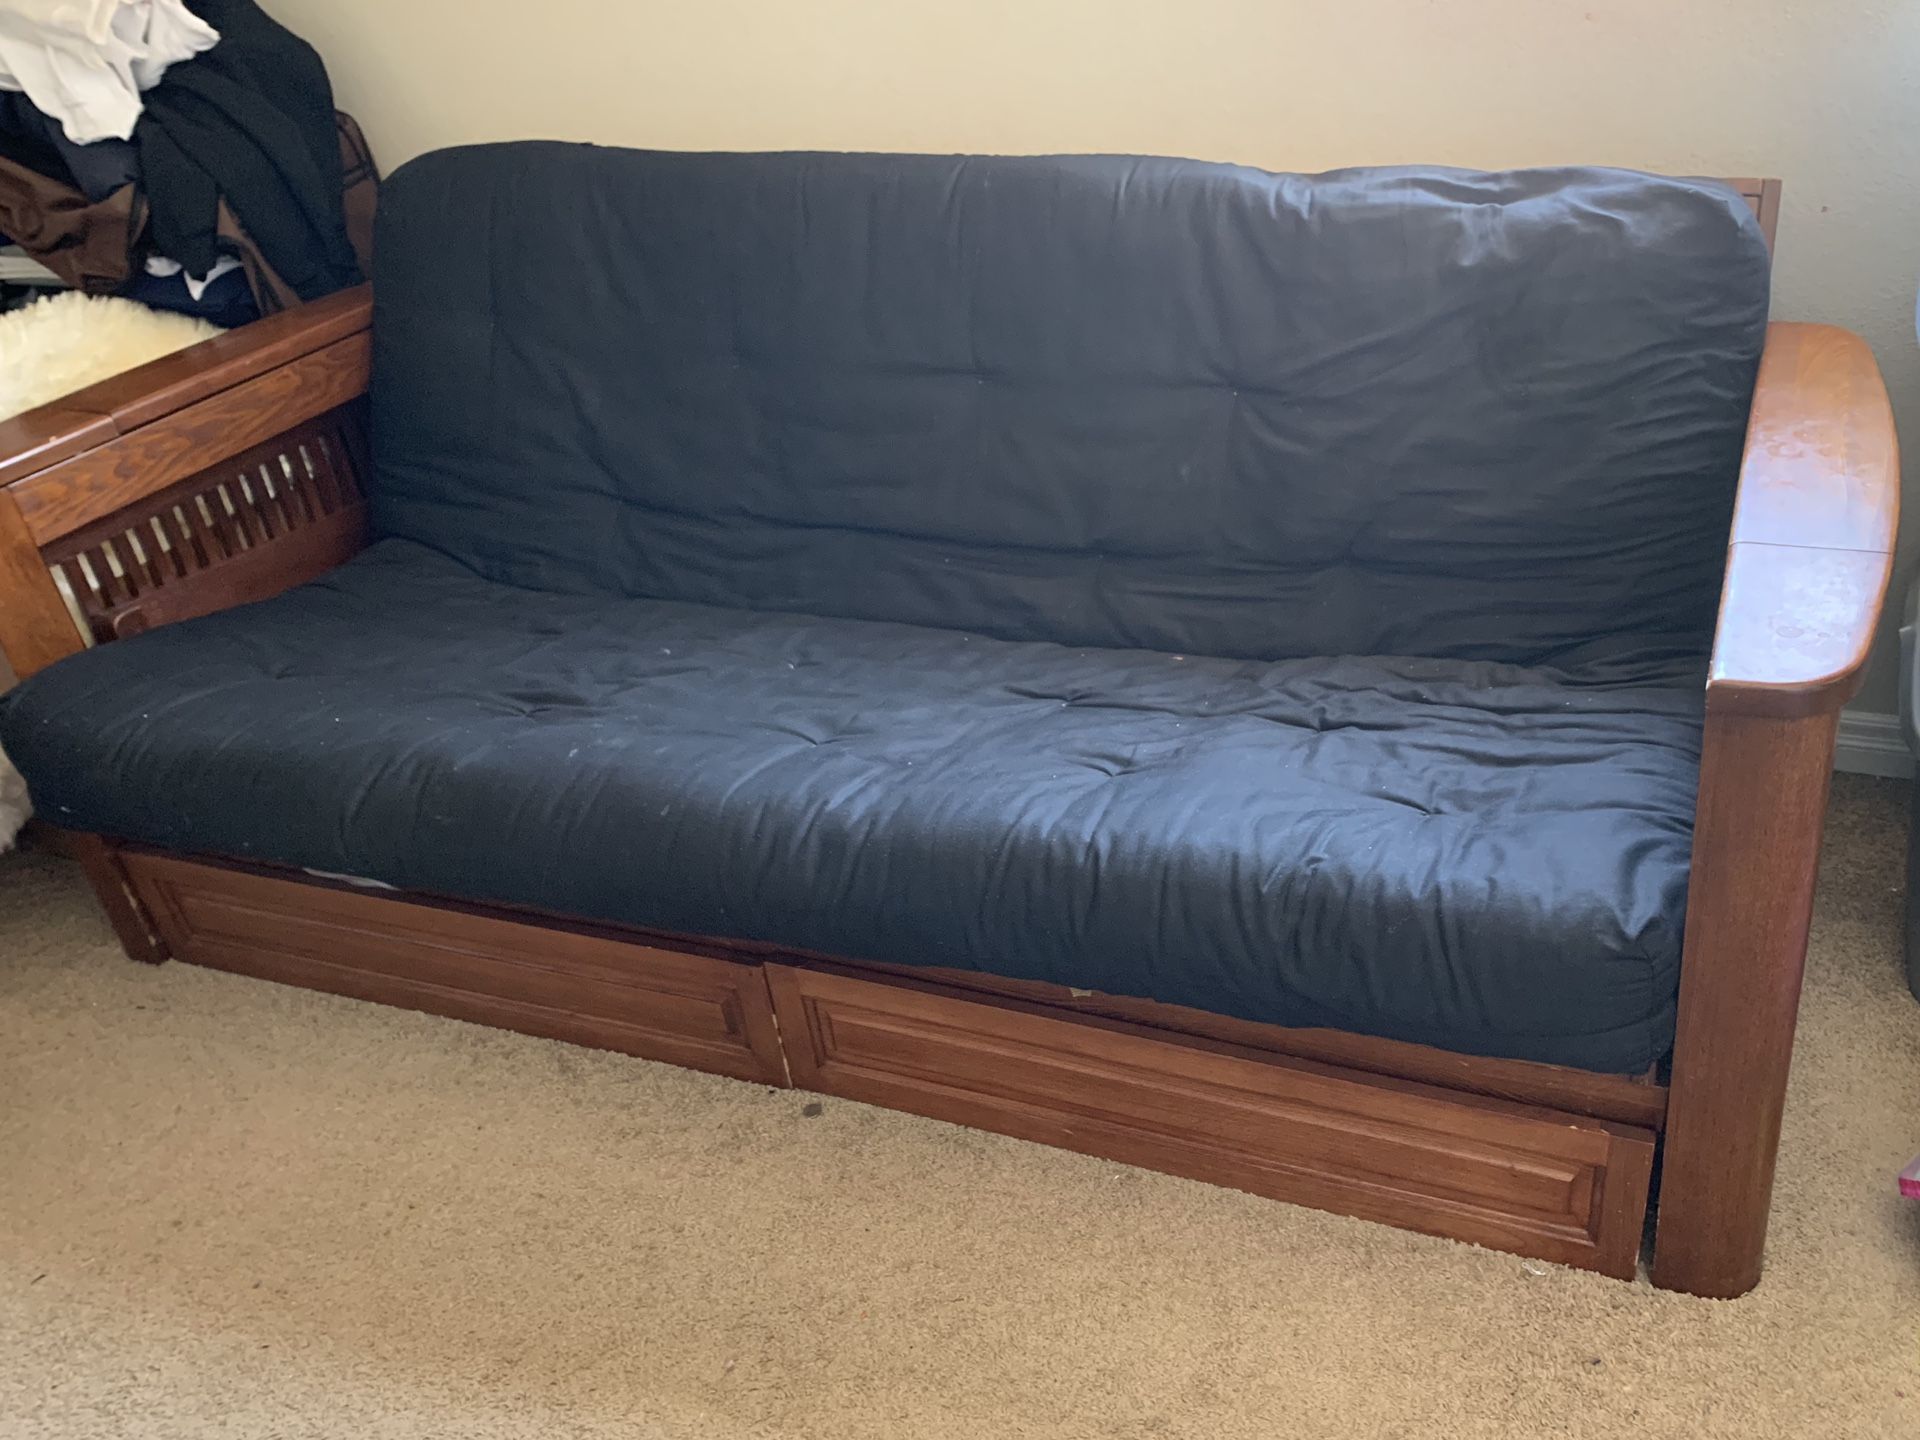 Full size Futon bed/couch with storage